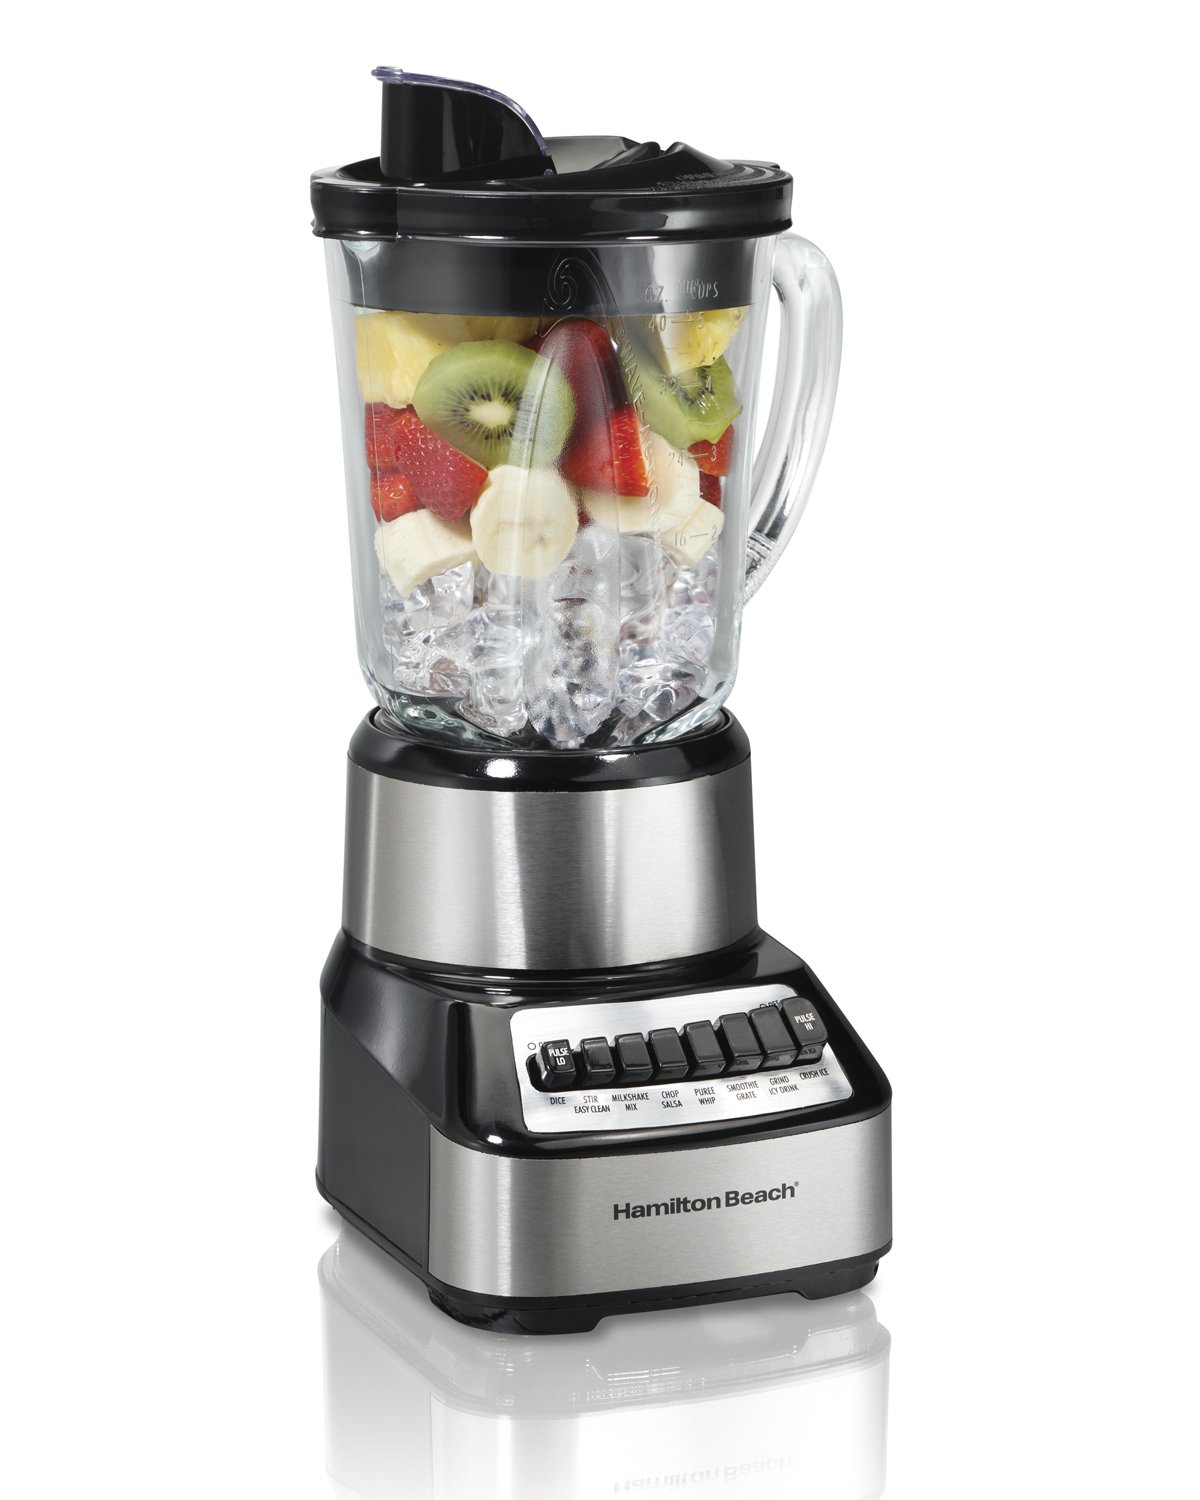 Hamilton Beach Wave Crusher Blender with 40oz Glass Jar & Beach 6-Speed Electric Hand Mixer with Snap-On Storage Case, Wire Beaters, Whisk and Bowl Rest, 250W, White (62682RZ)